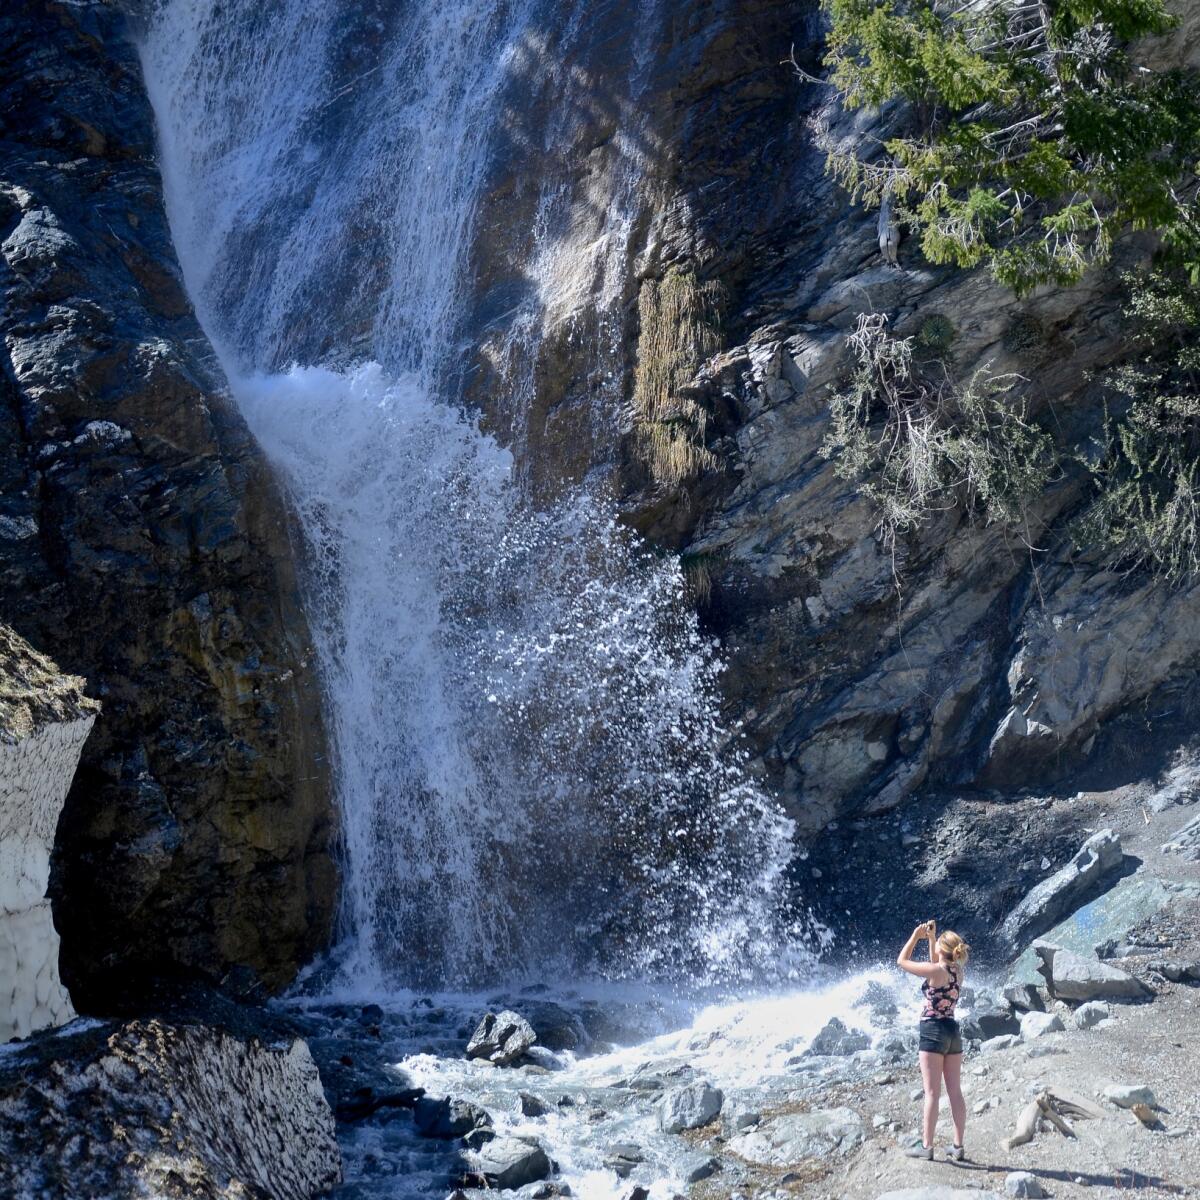 San Antonio Falls, shown here in March 2017, is one of many areas in the San Gabriel Mountains closed by Angeles National Forest on Friday. The closure is set to last through April 30.